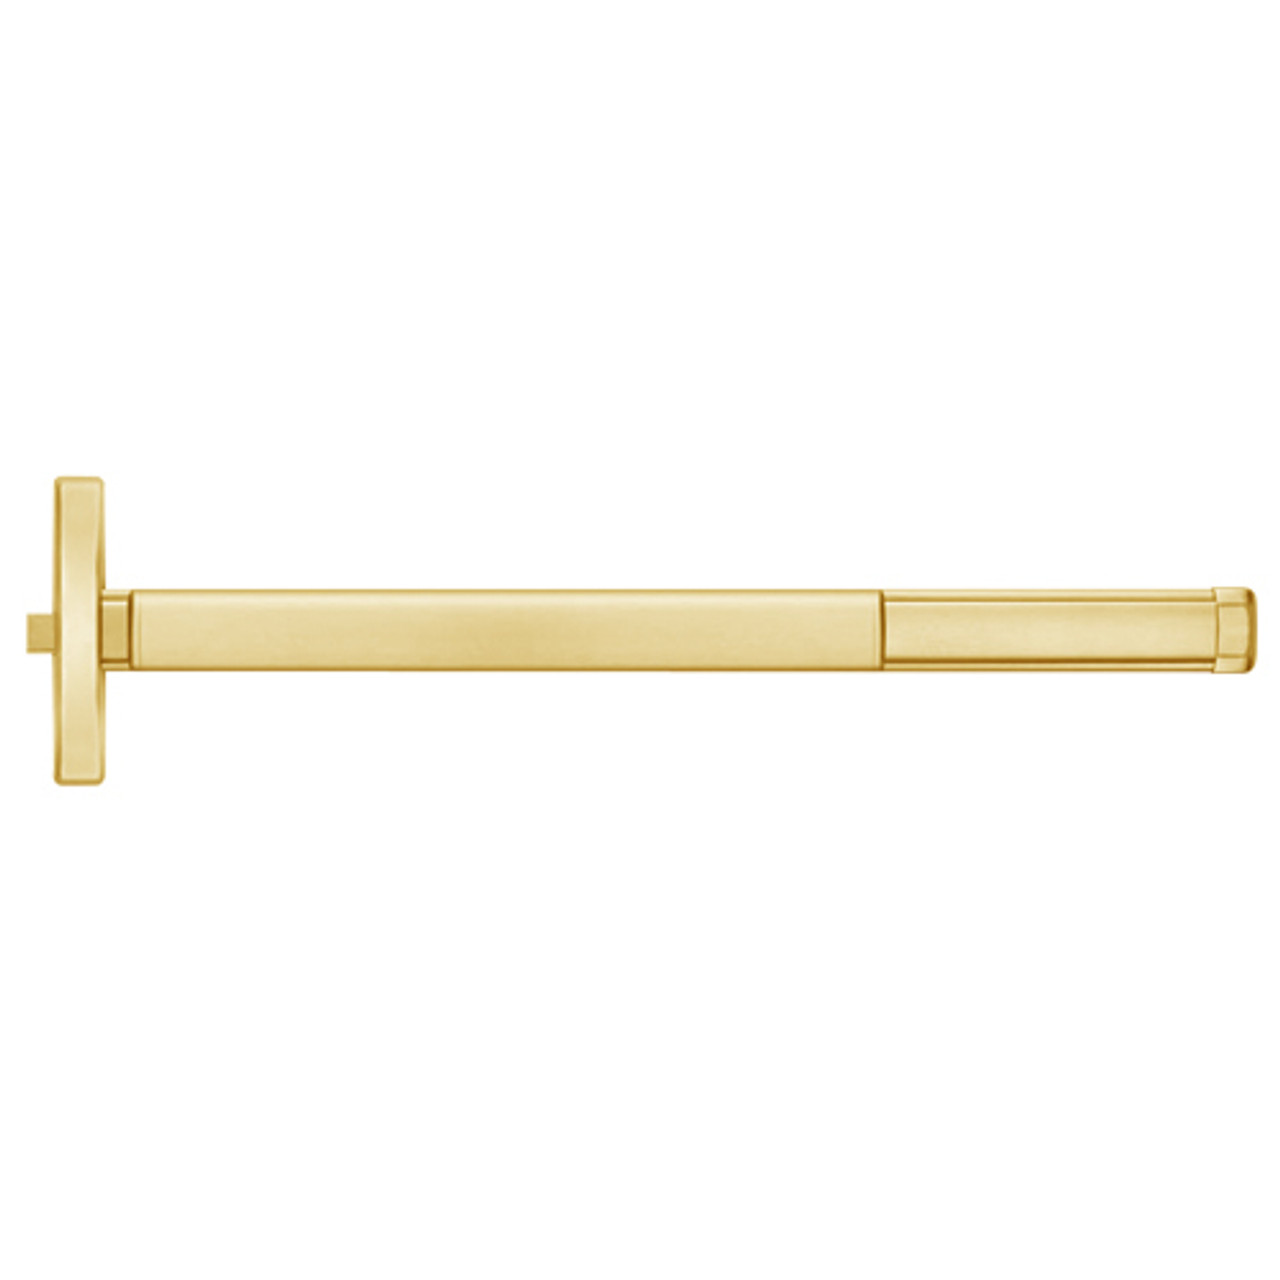 ELRFL2414-605-48 PHI 2400 Series Fire Rated Apex Rim Exit Device with Electric Latch Retraction Prepped for Lever Always Active in Bright Brass Finish